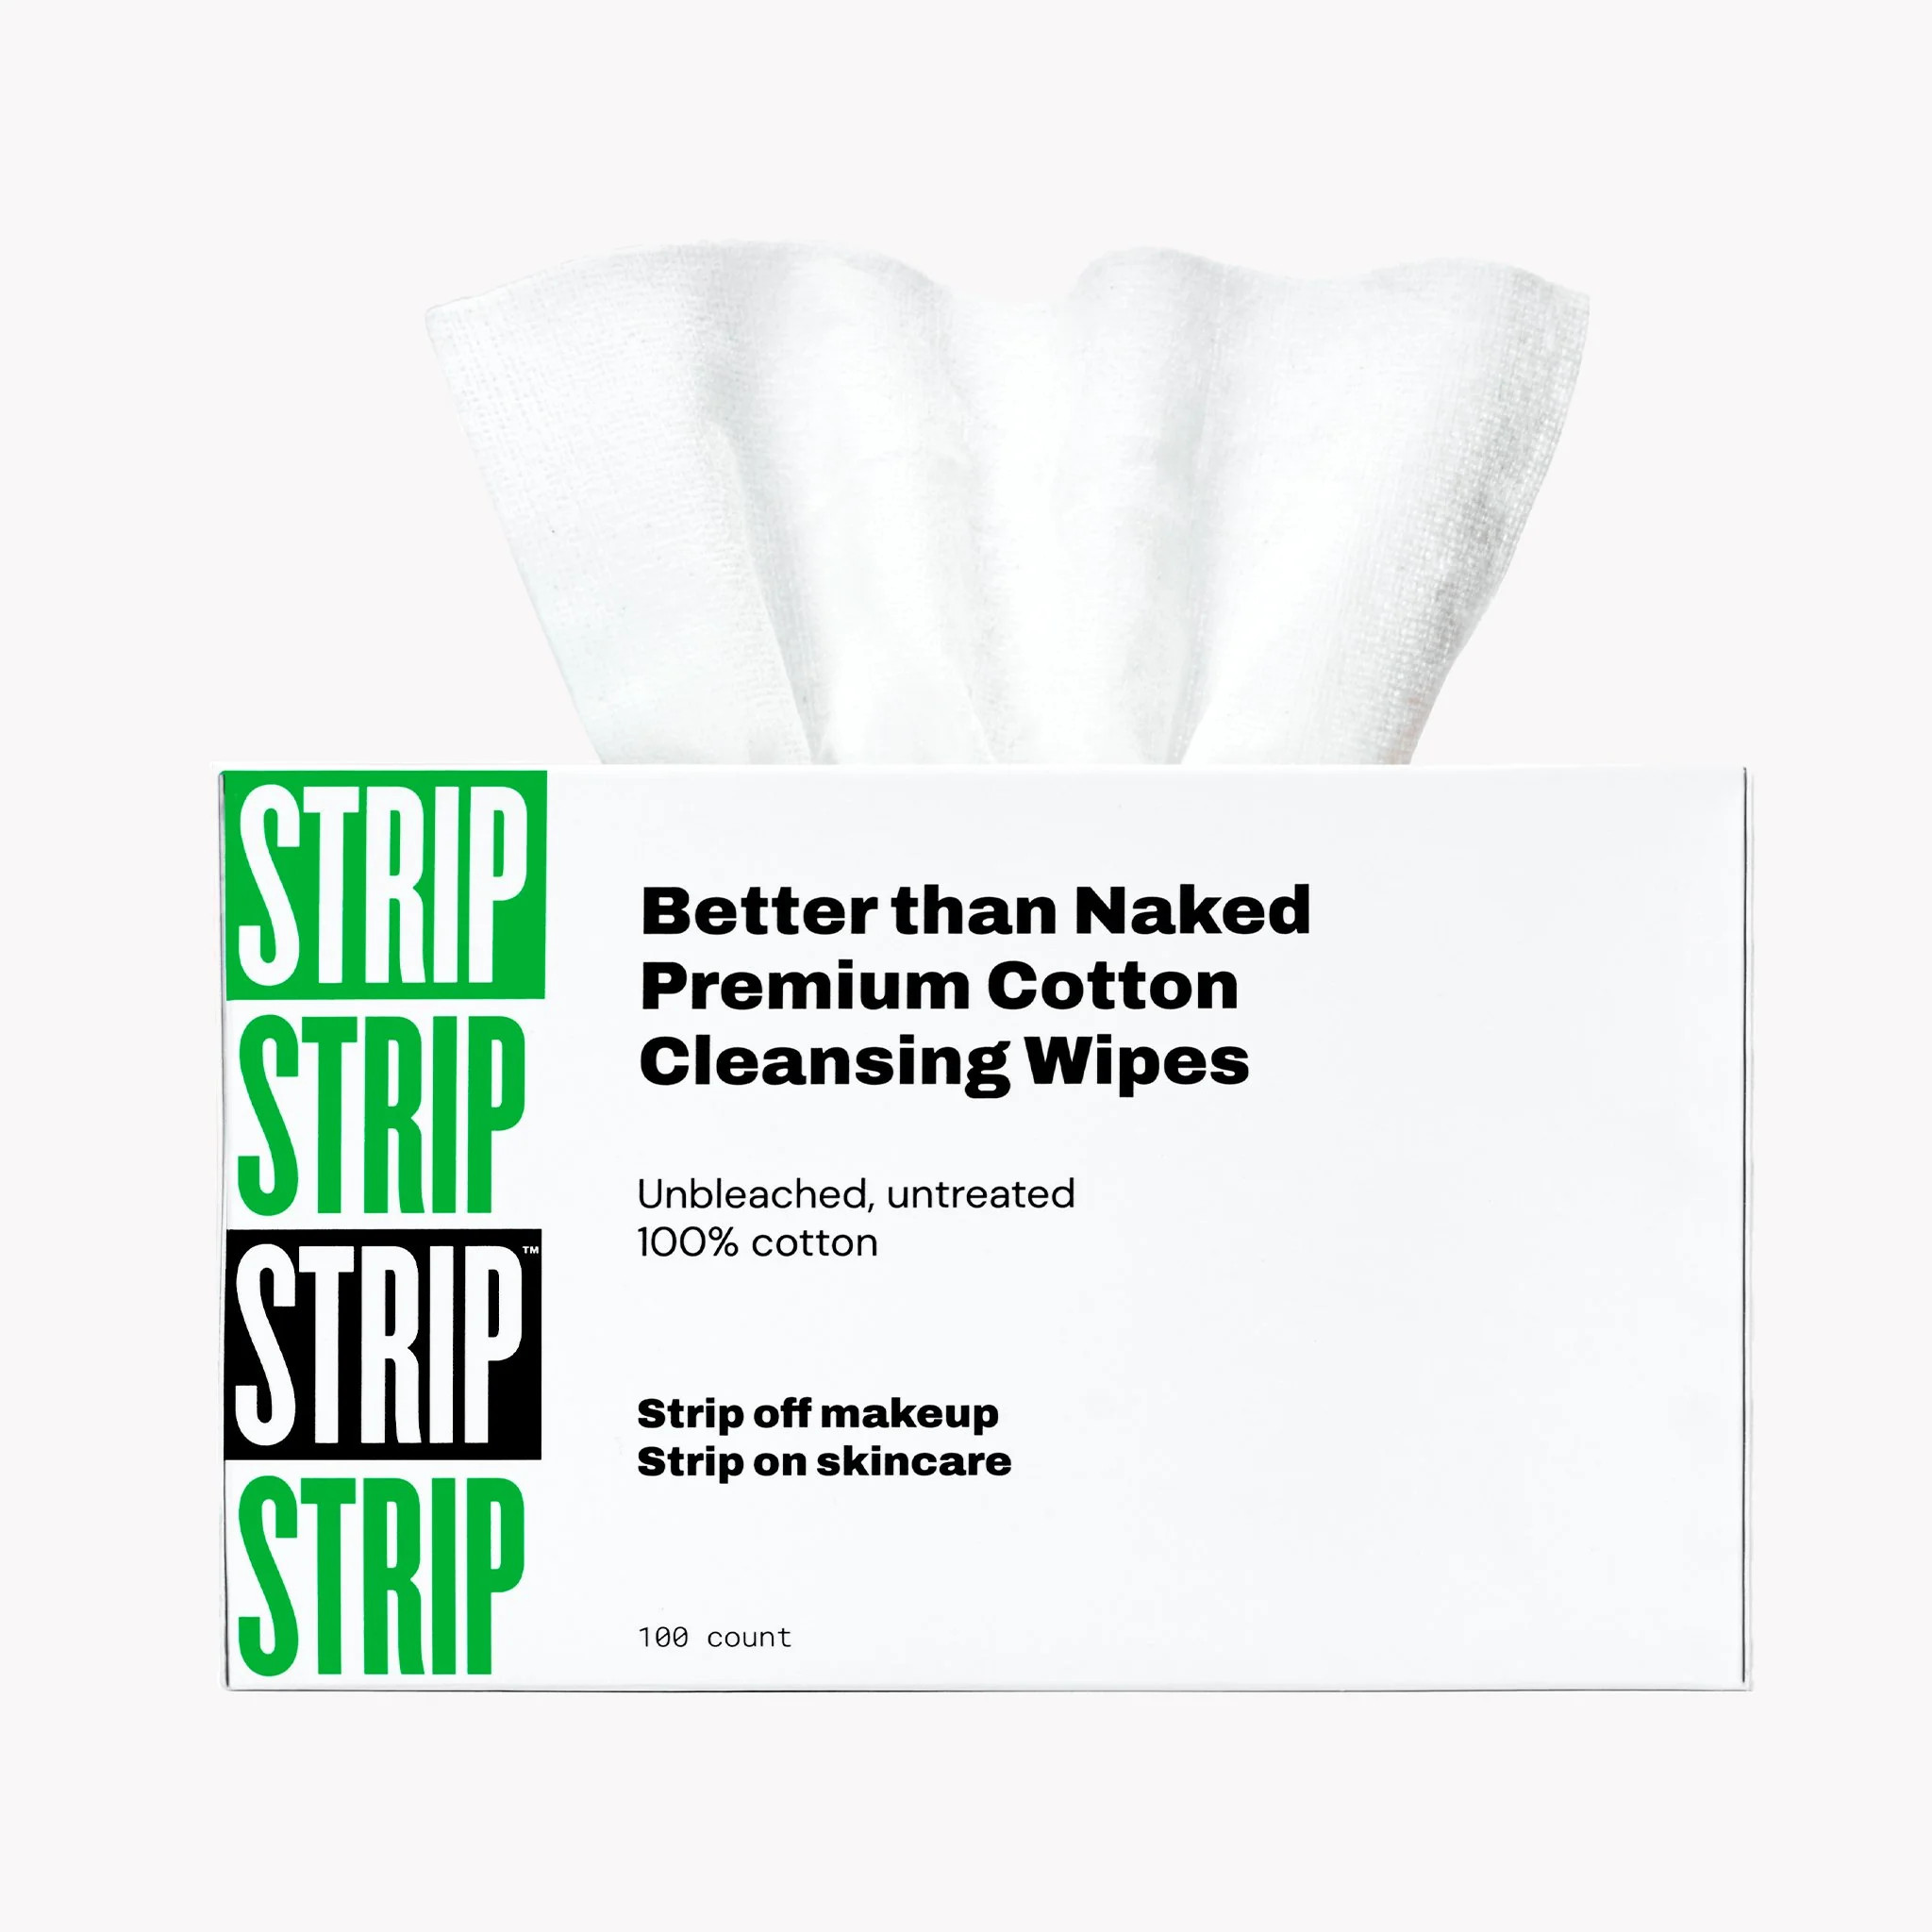 Facial Cleansing 100% Cotton Wipes & Makeup Remover Products | STRIP - Strip Makeup | Strip Makeup